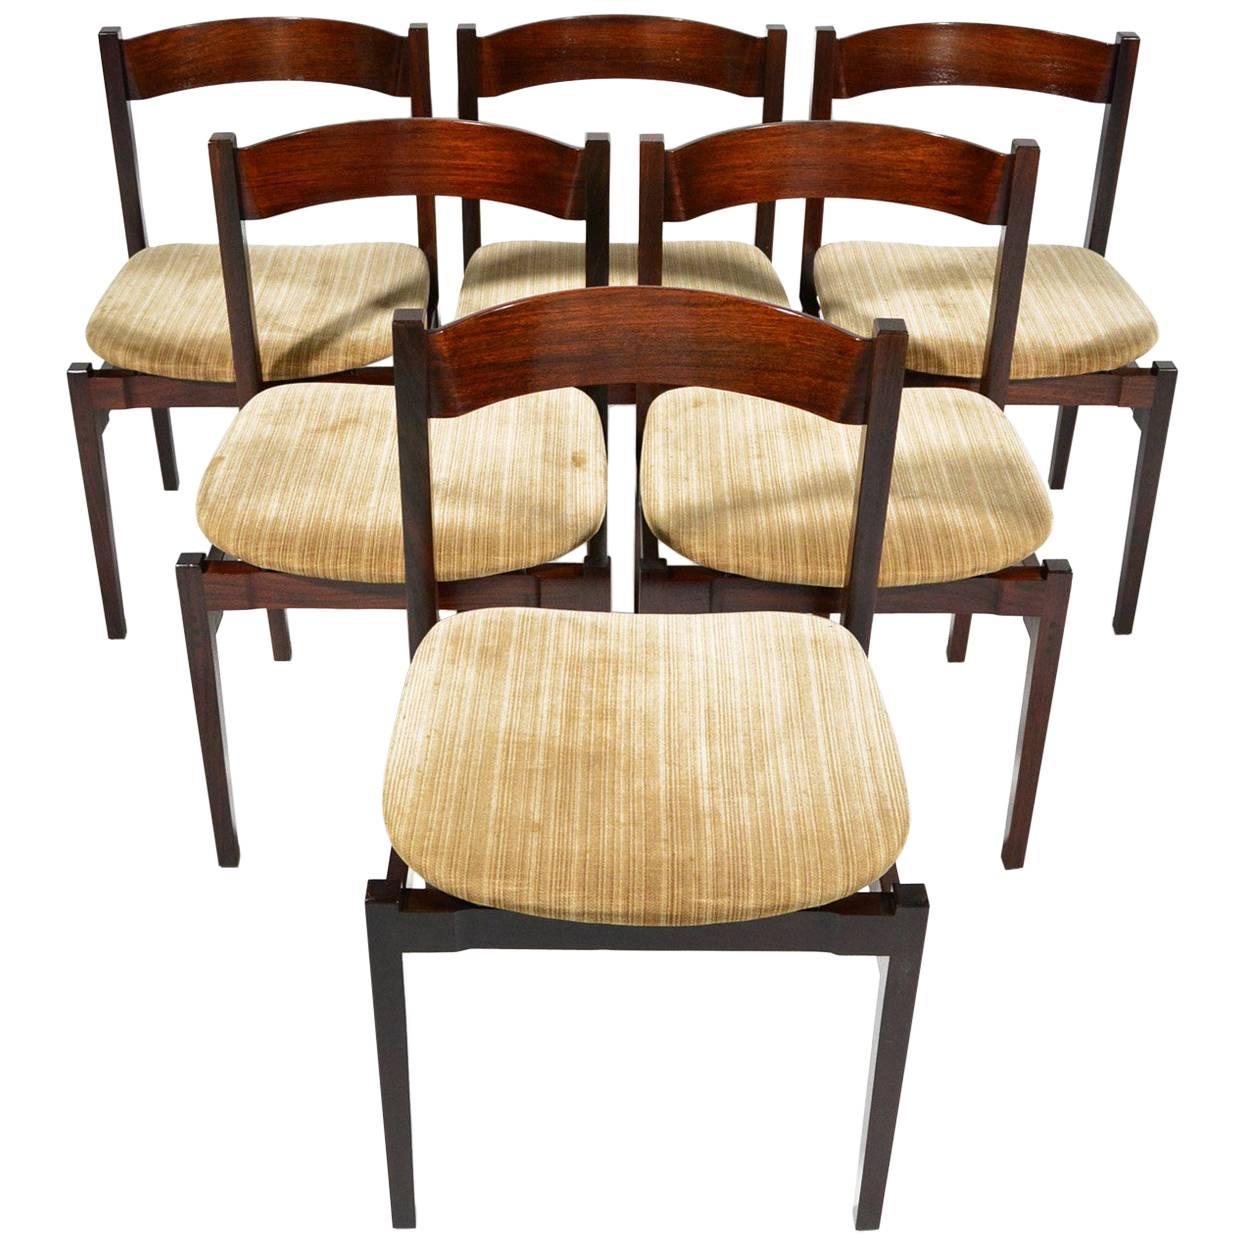 Six Gianfranco Frattini Rosewood Chairs Mod. 101 for Cassina, 1959